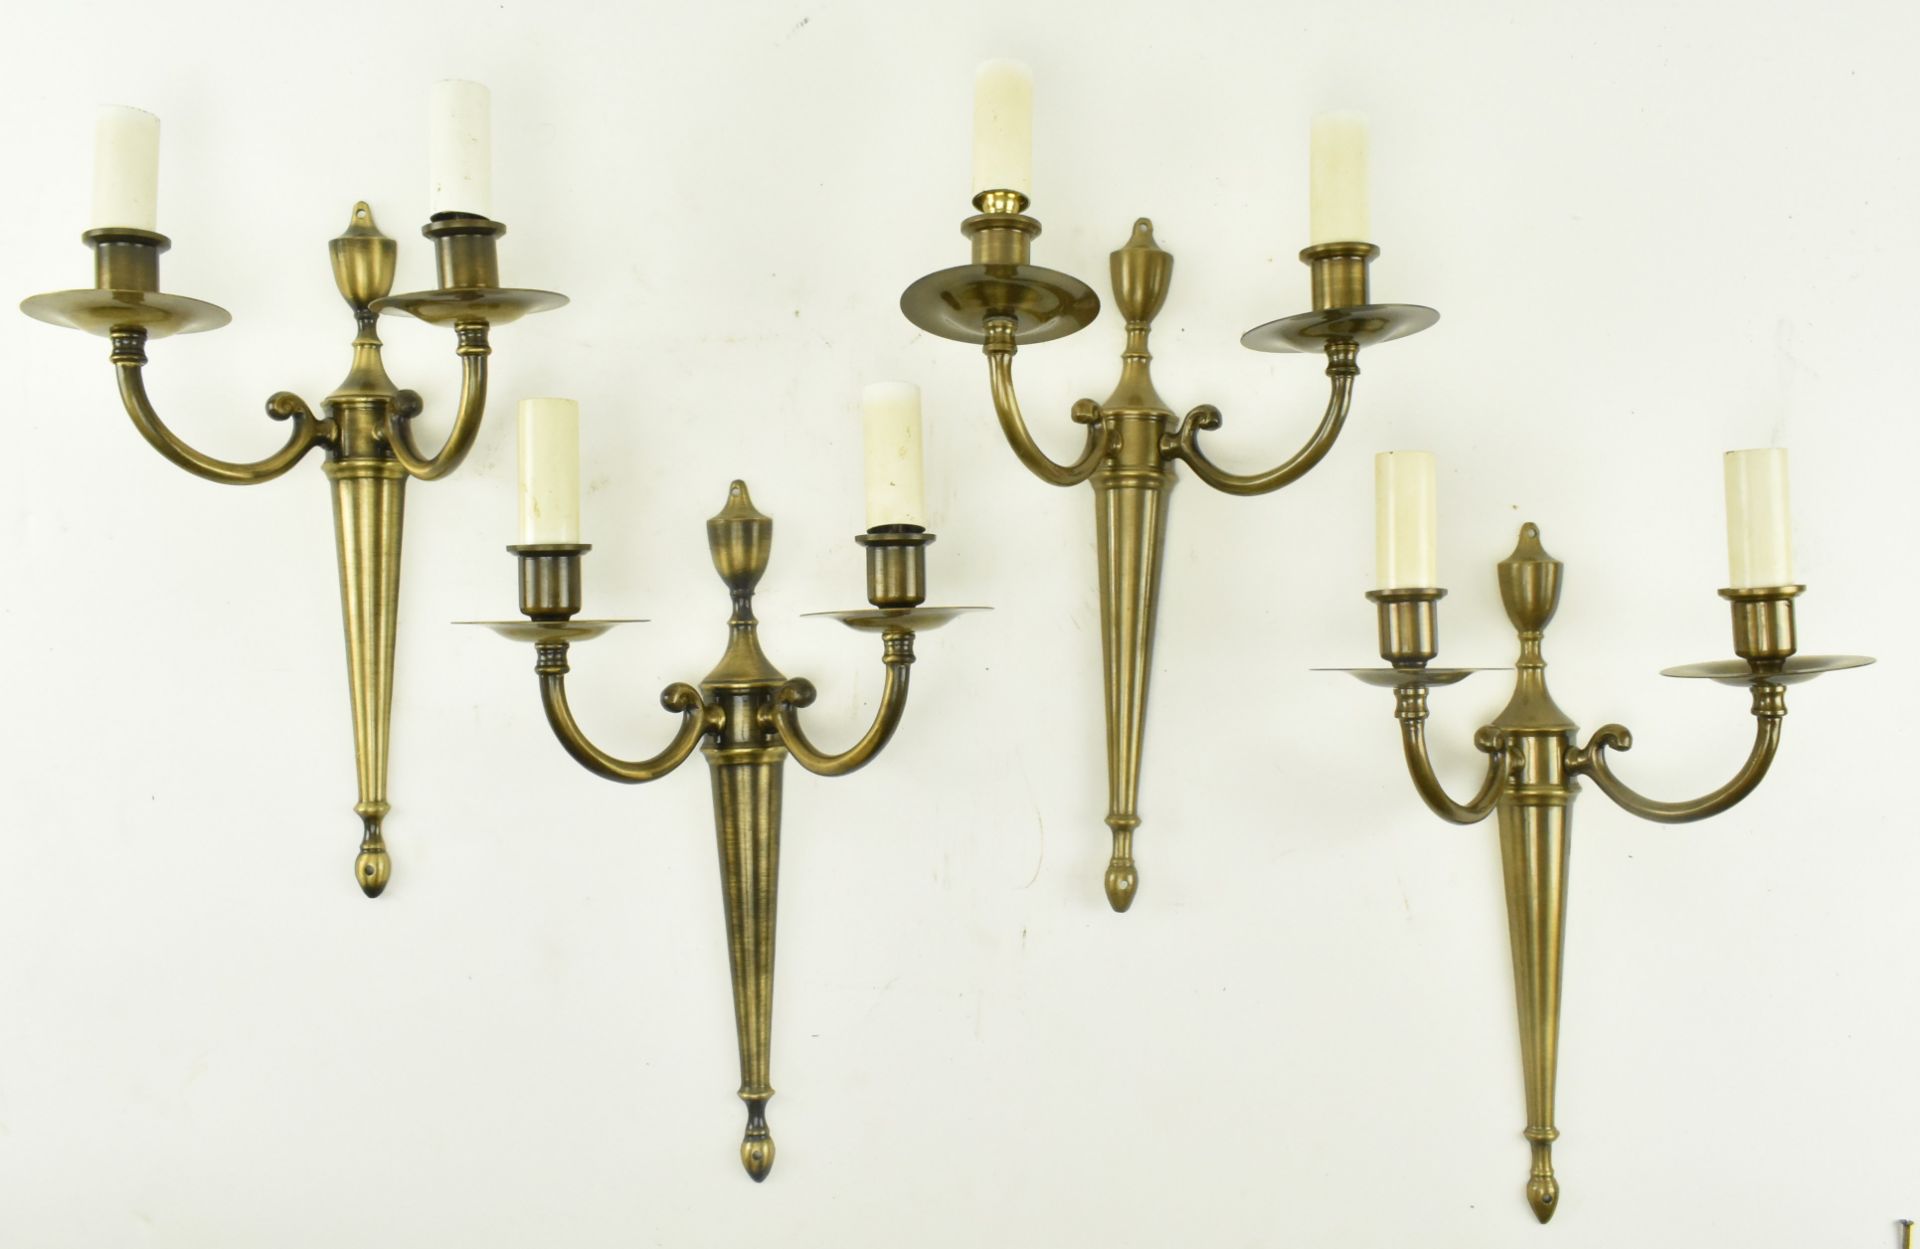 FOUR ITALIAN MANNER 20TH CENTURY BRASS WALL SCONCES